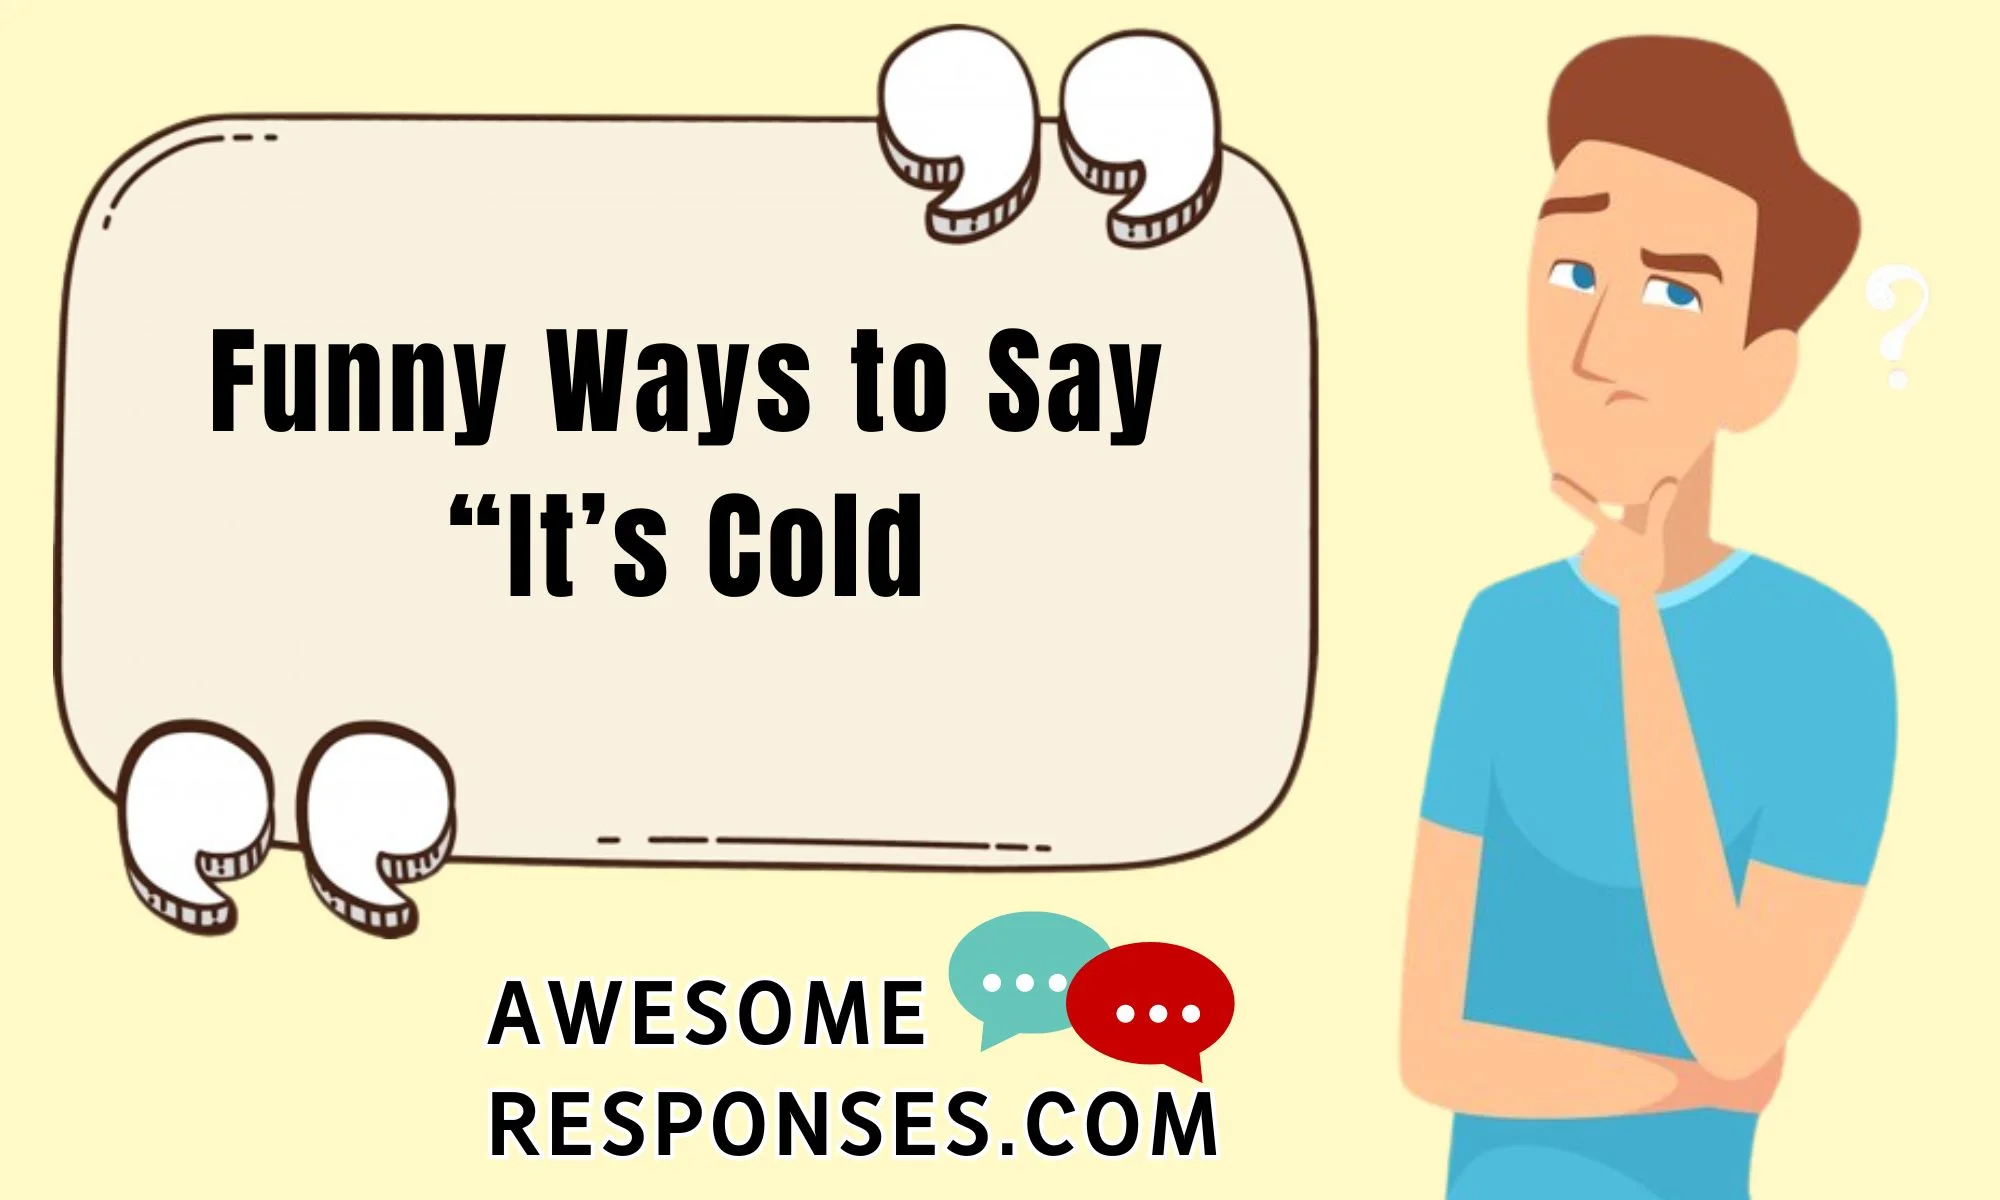 Funny Ways to Say “It’s Cold